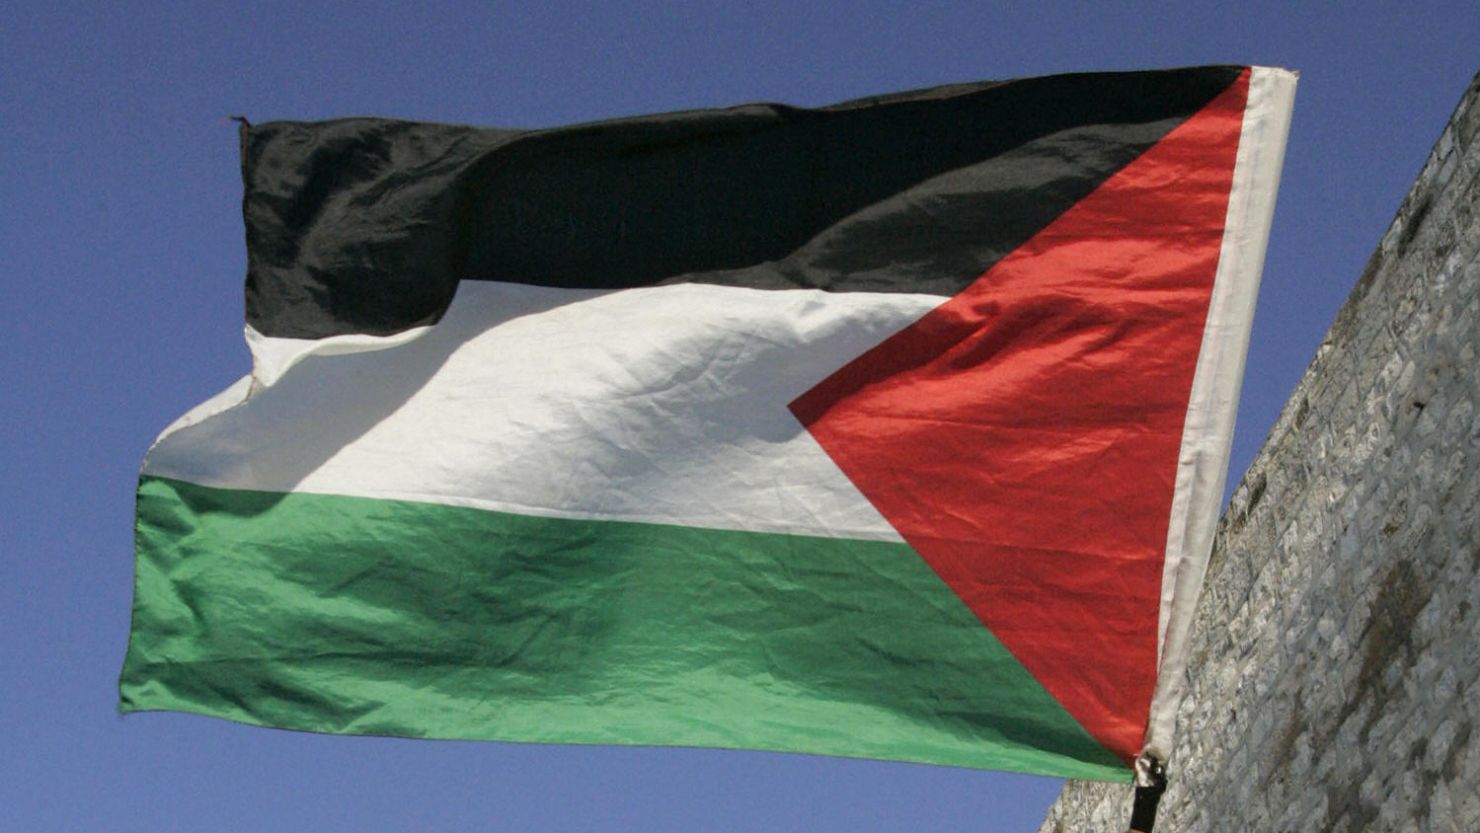 The U.N. General Assembly approved a move allowing the "State of Palestine" and the Vatican to raise their flags following the flags of member states.